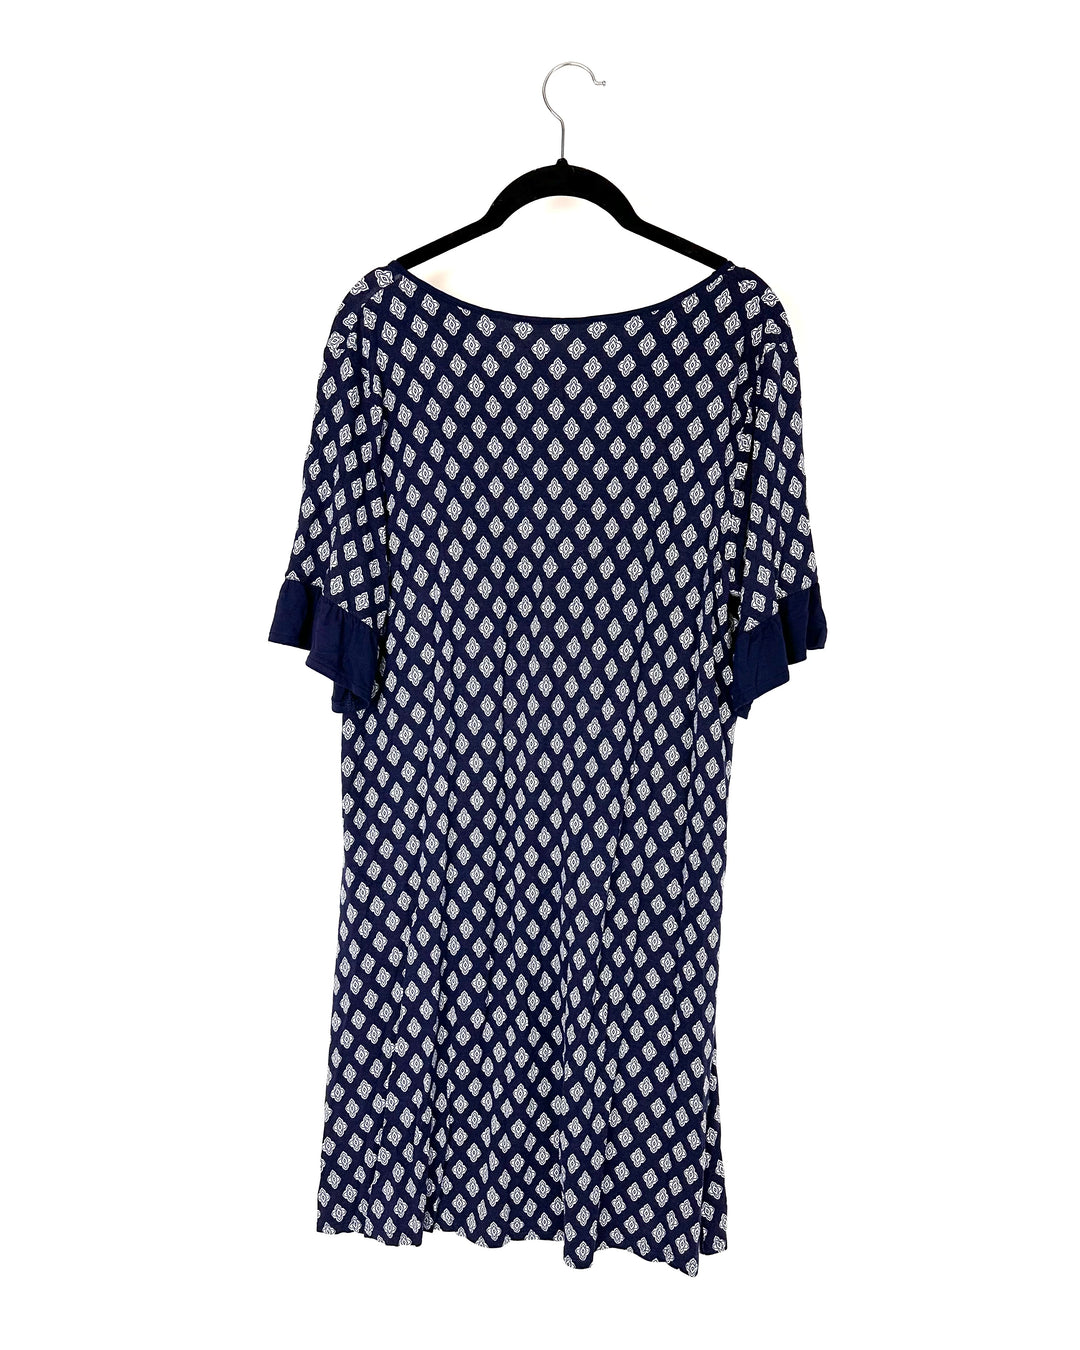 Navy Blue and White Pattern Nightgown - Small